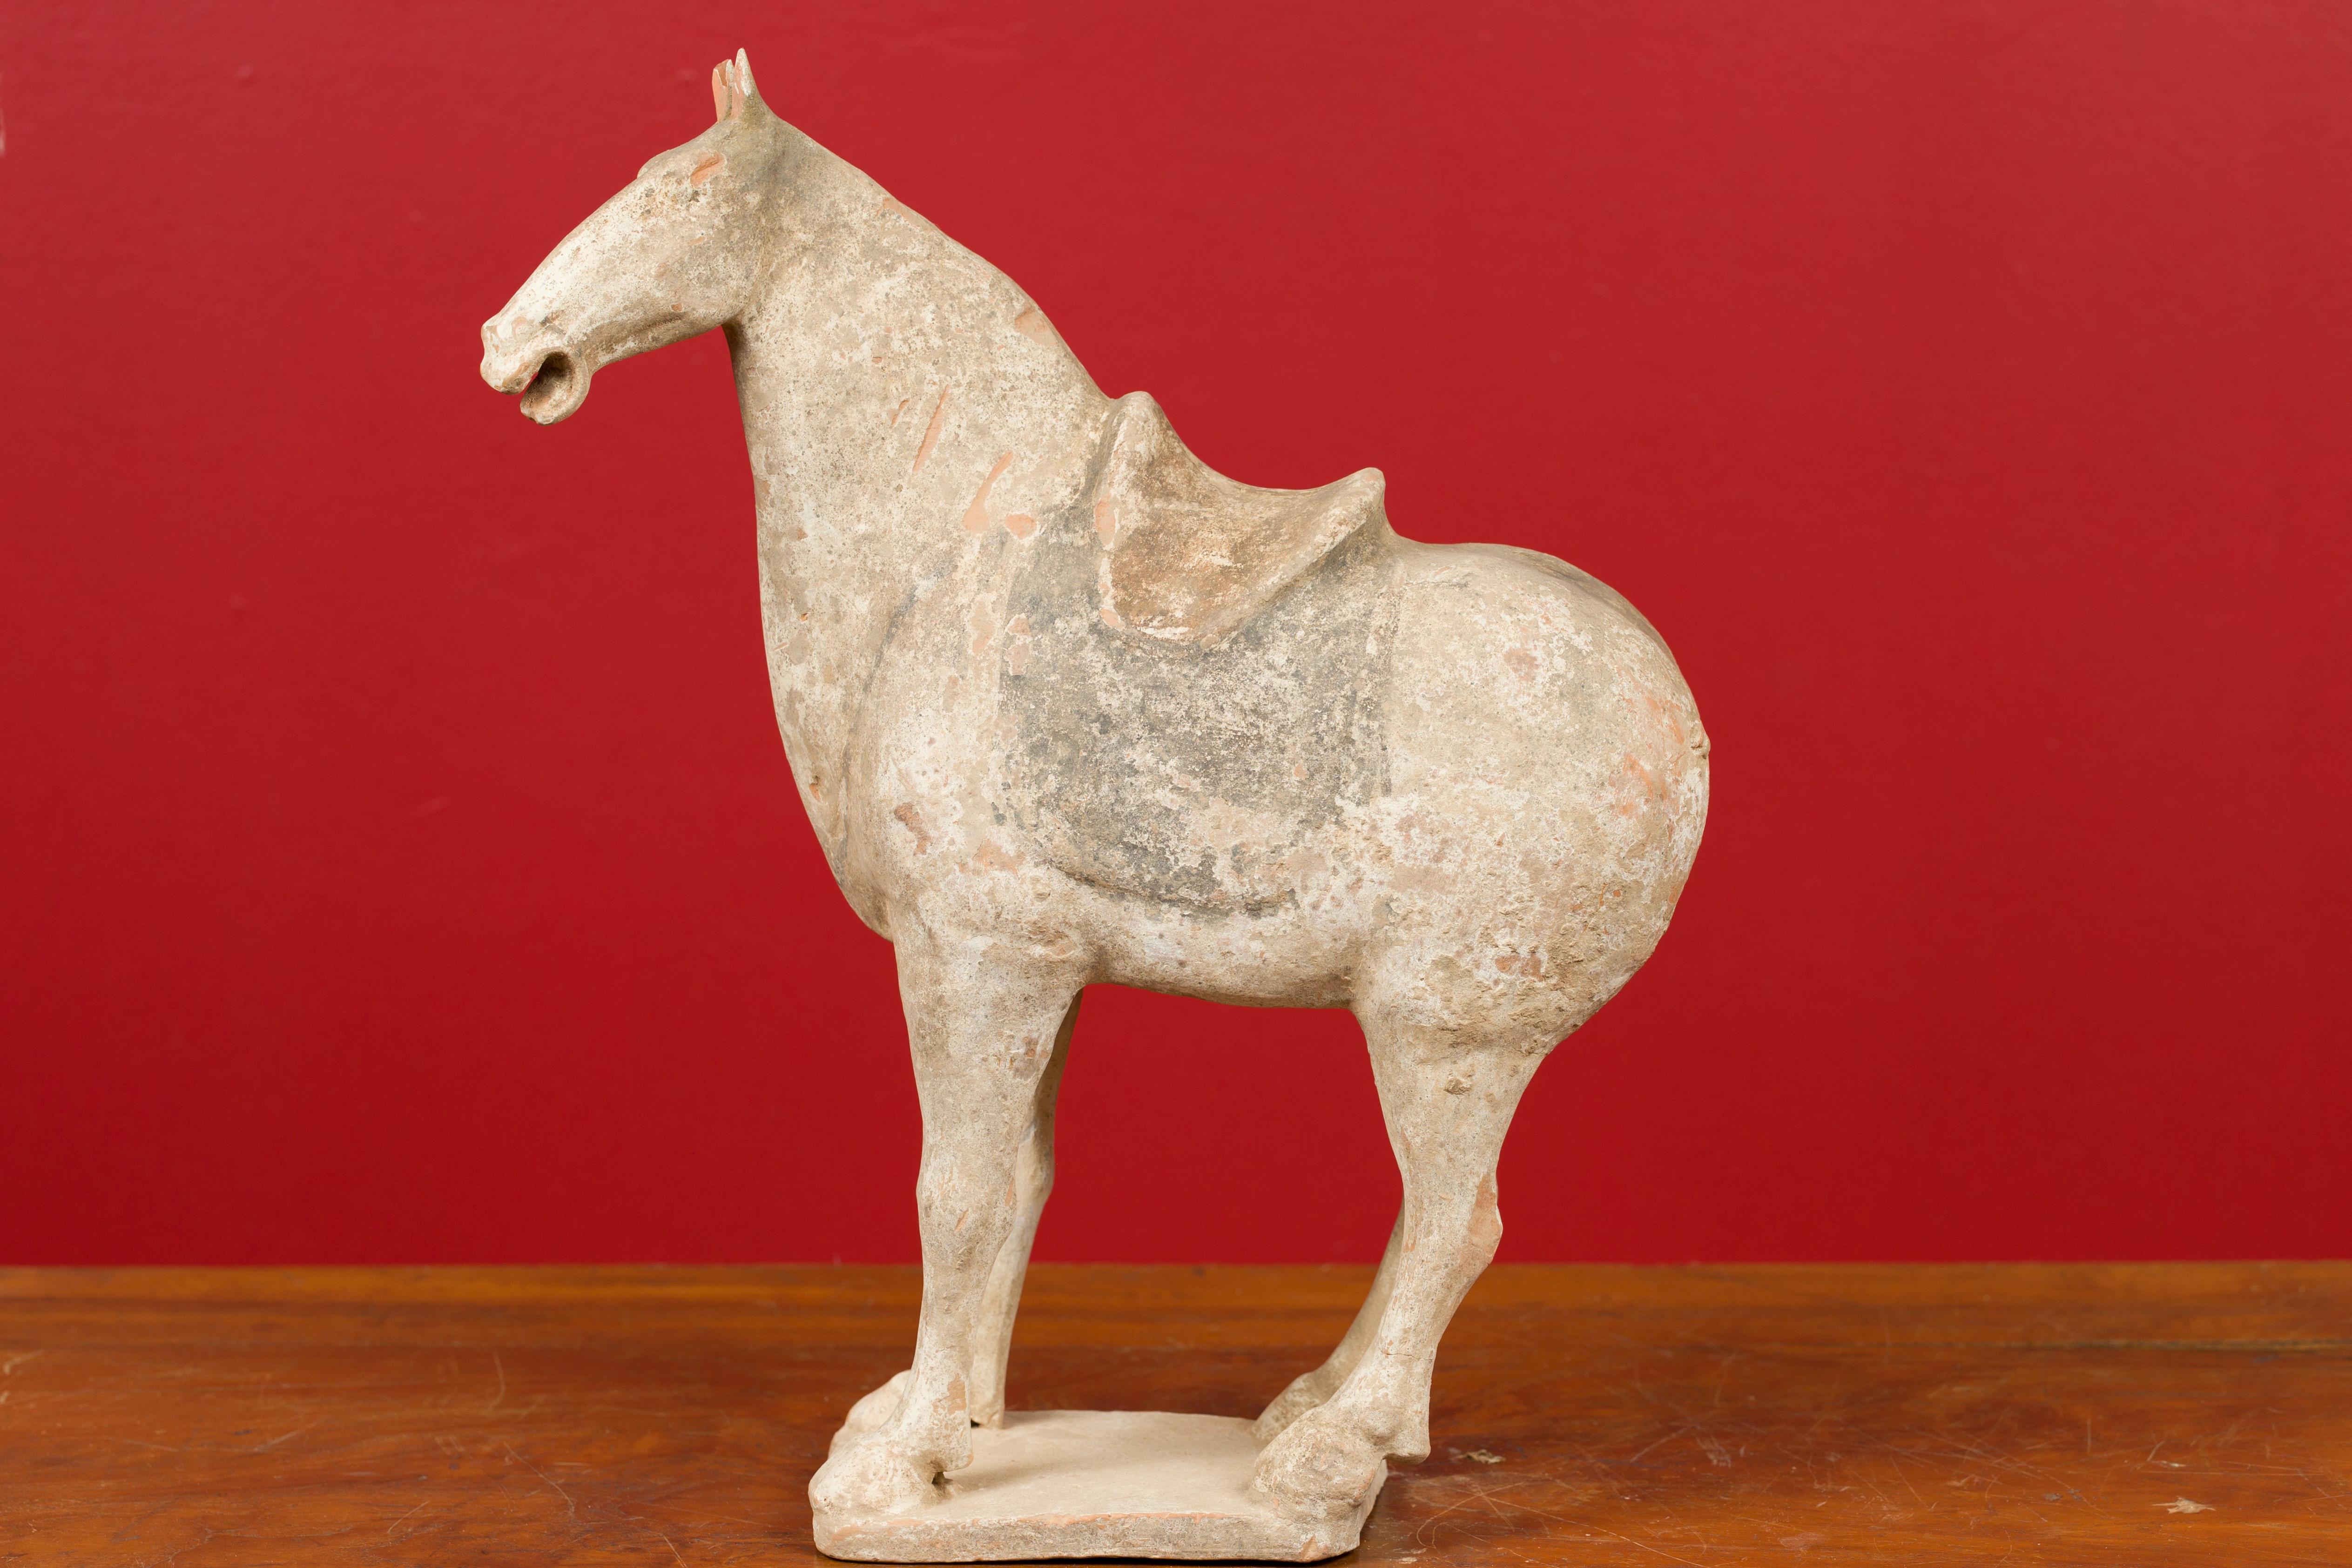 Chinese Han Dynasty 202 BC-200 AD Terracotta Mingqi Horse with Traces of Original Paint